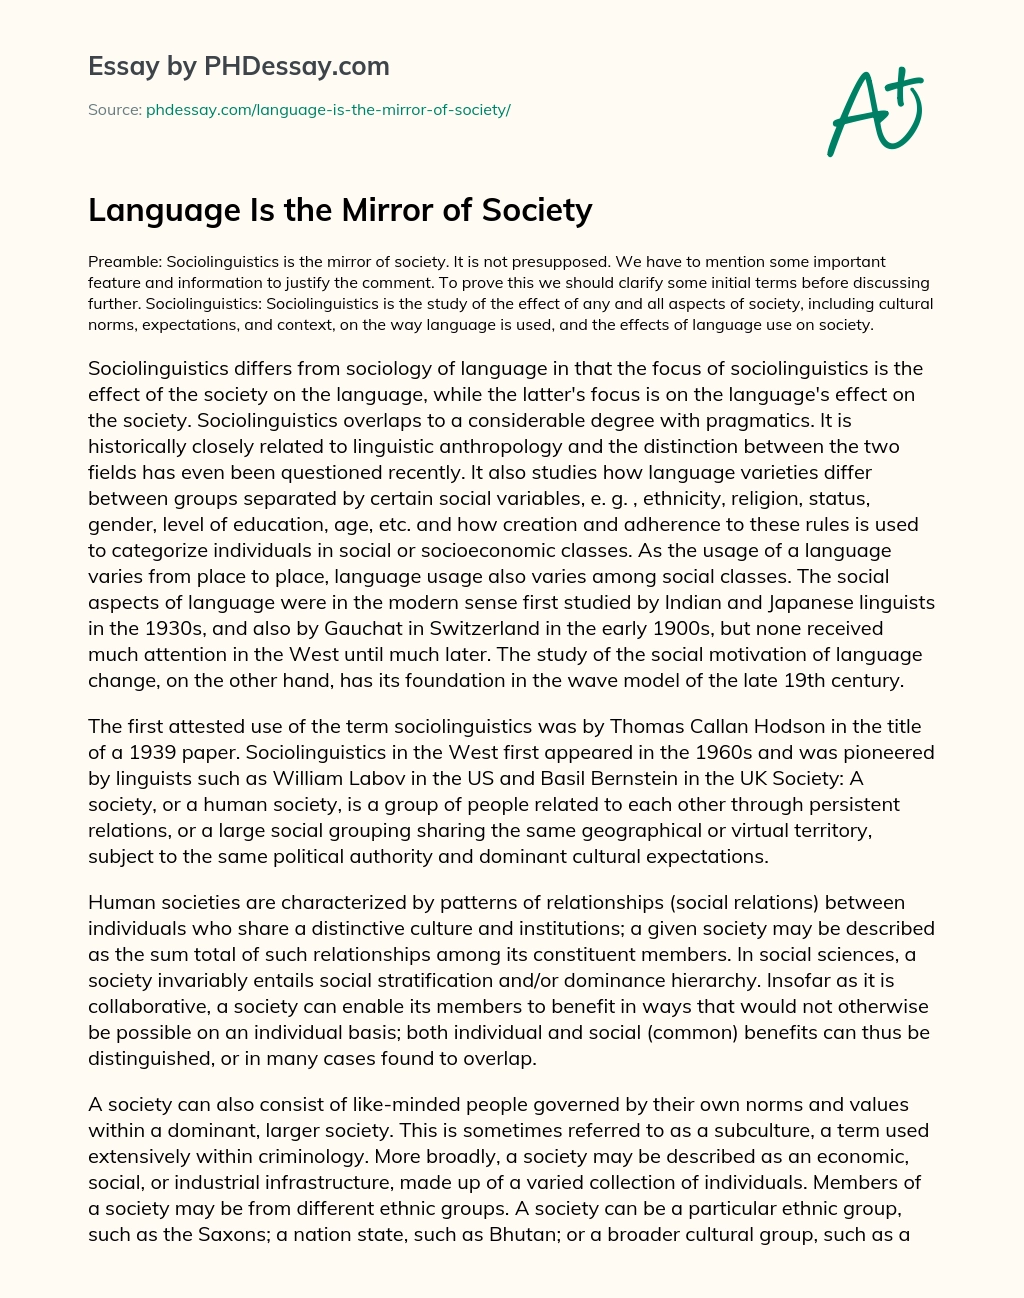 Language Is the Mirror of Society essay